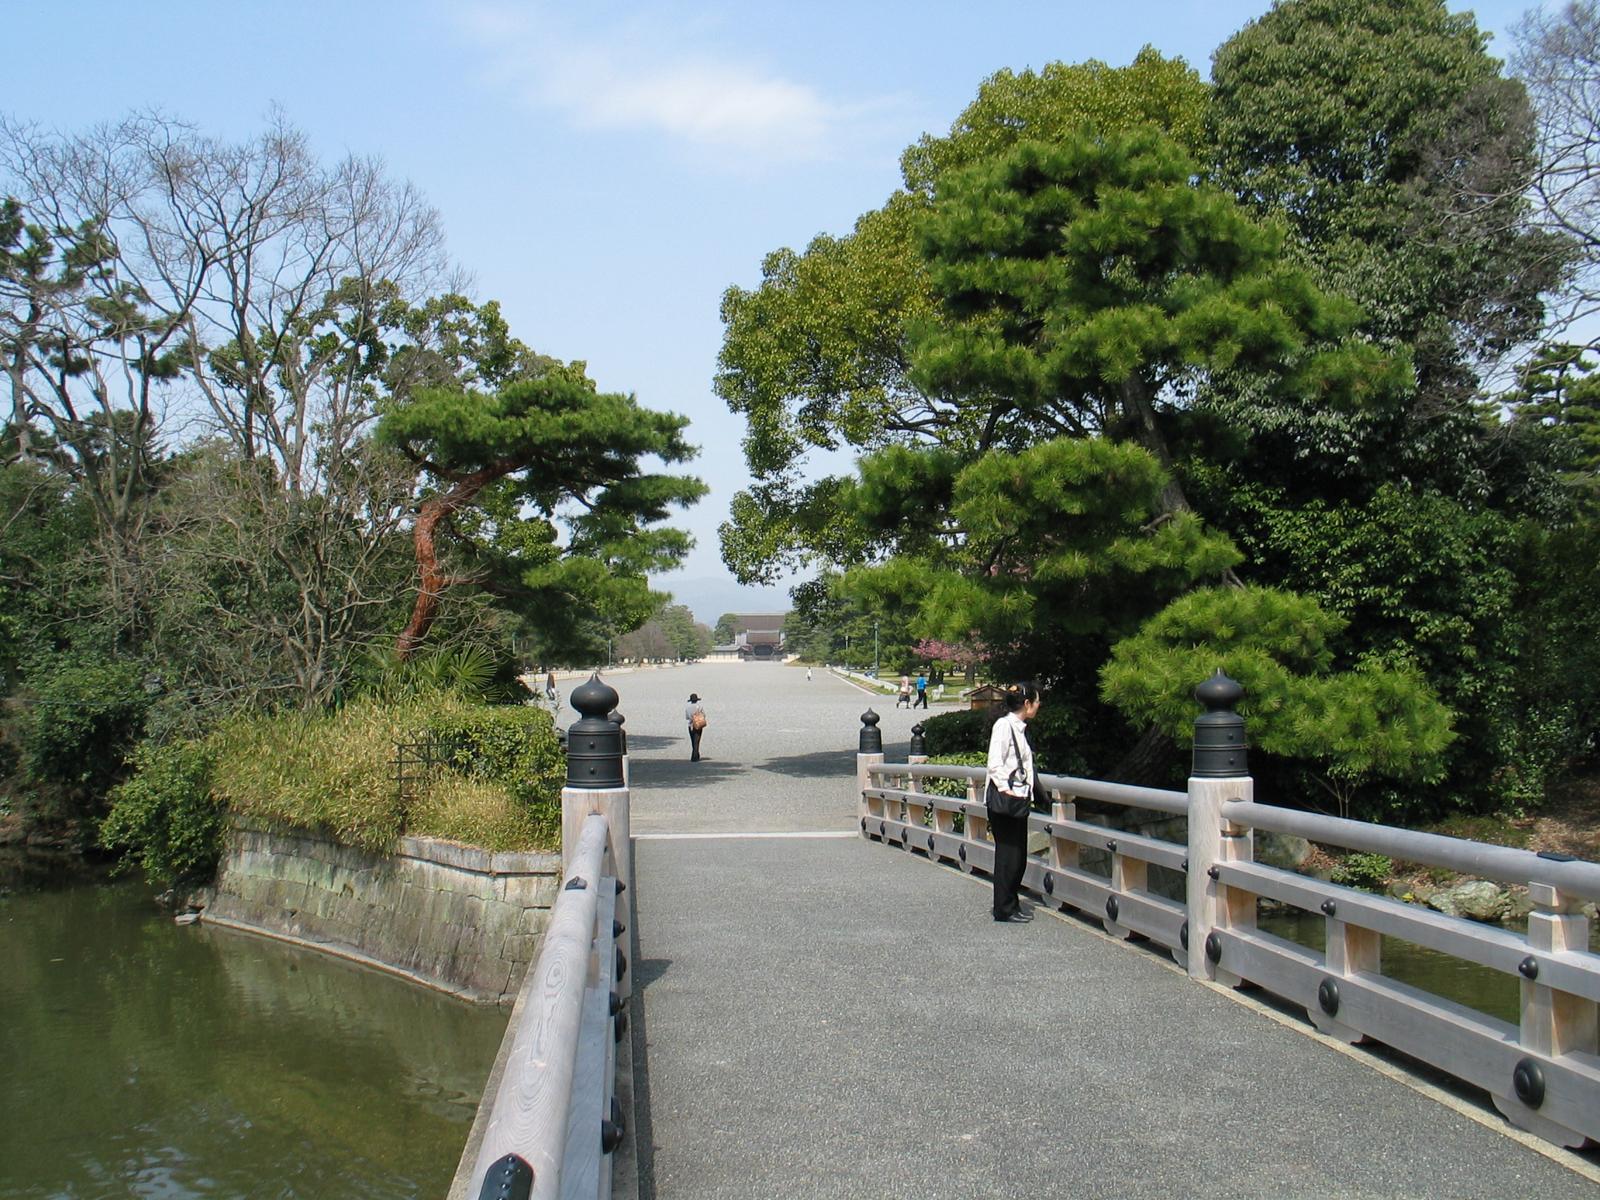 Around the Imperial Palace in Kyoto